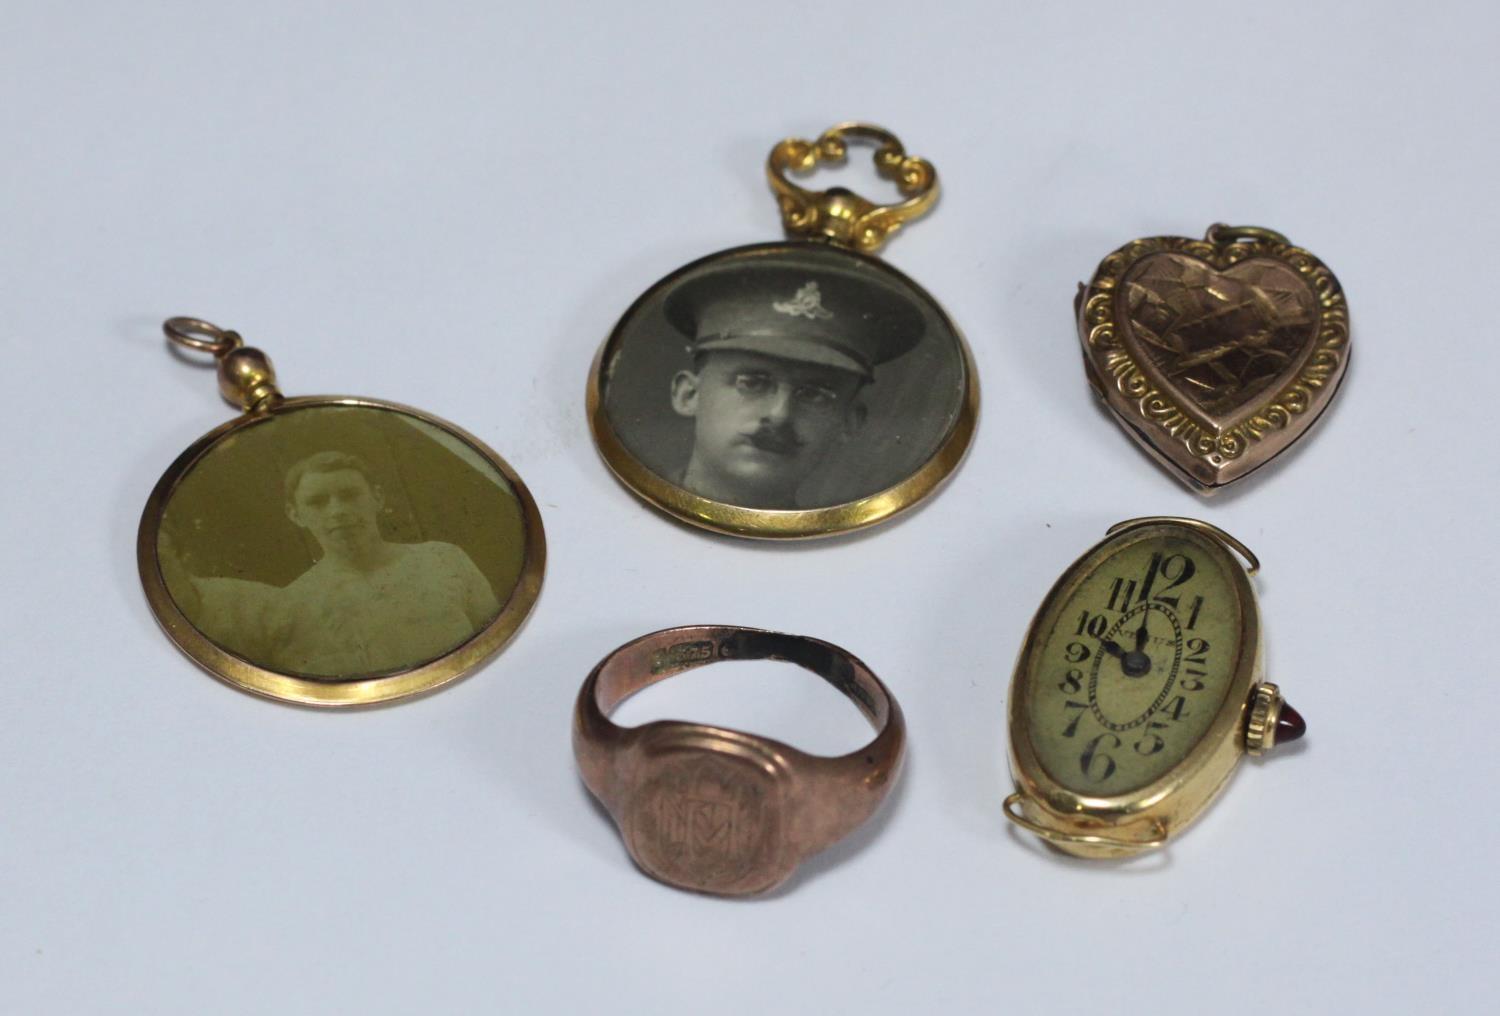 A 9ct gold gent's signet ring, 9ct locket, two 9ct gold-framed small photograph pendants and an 18ct